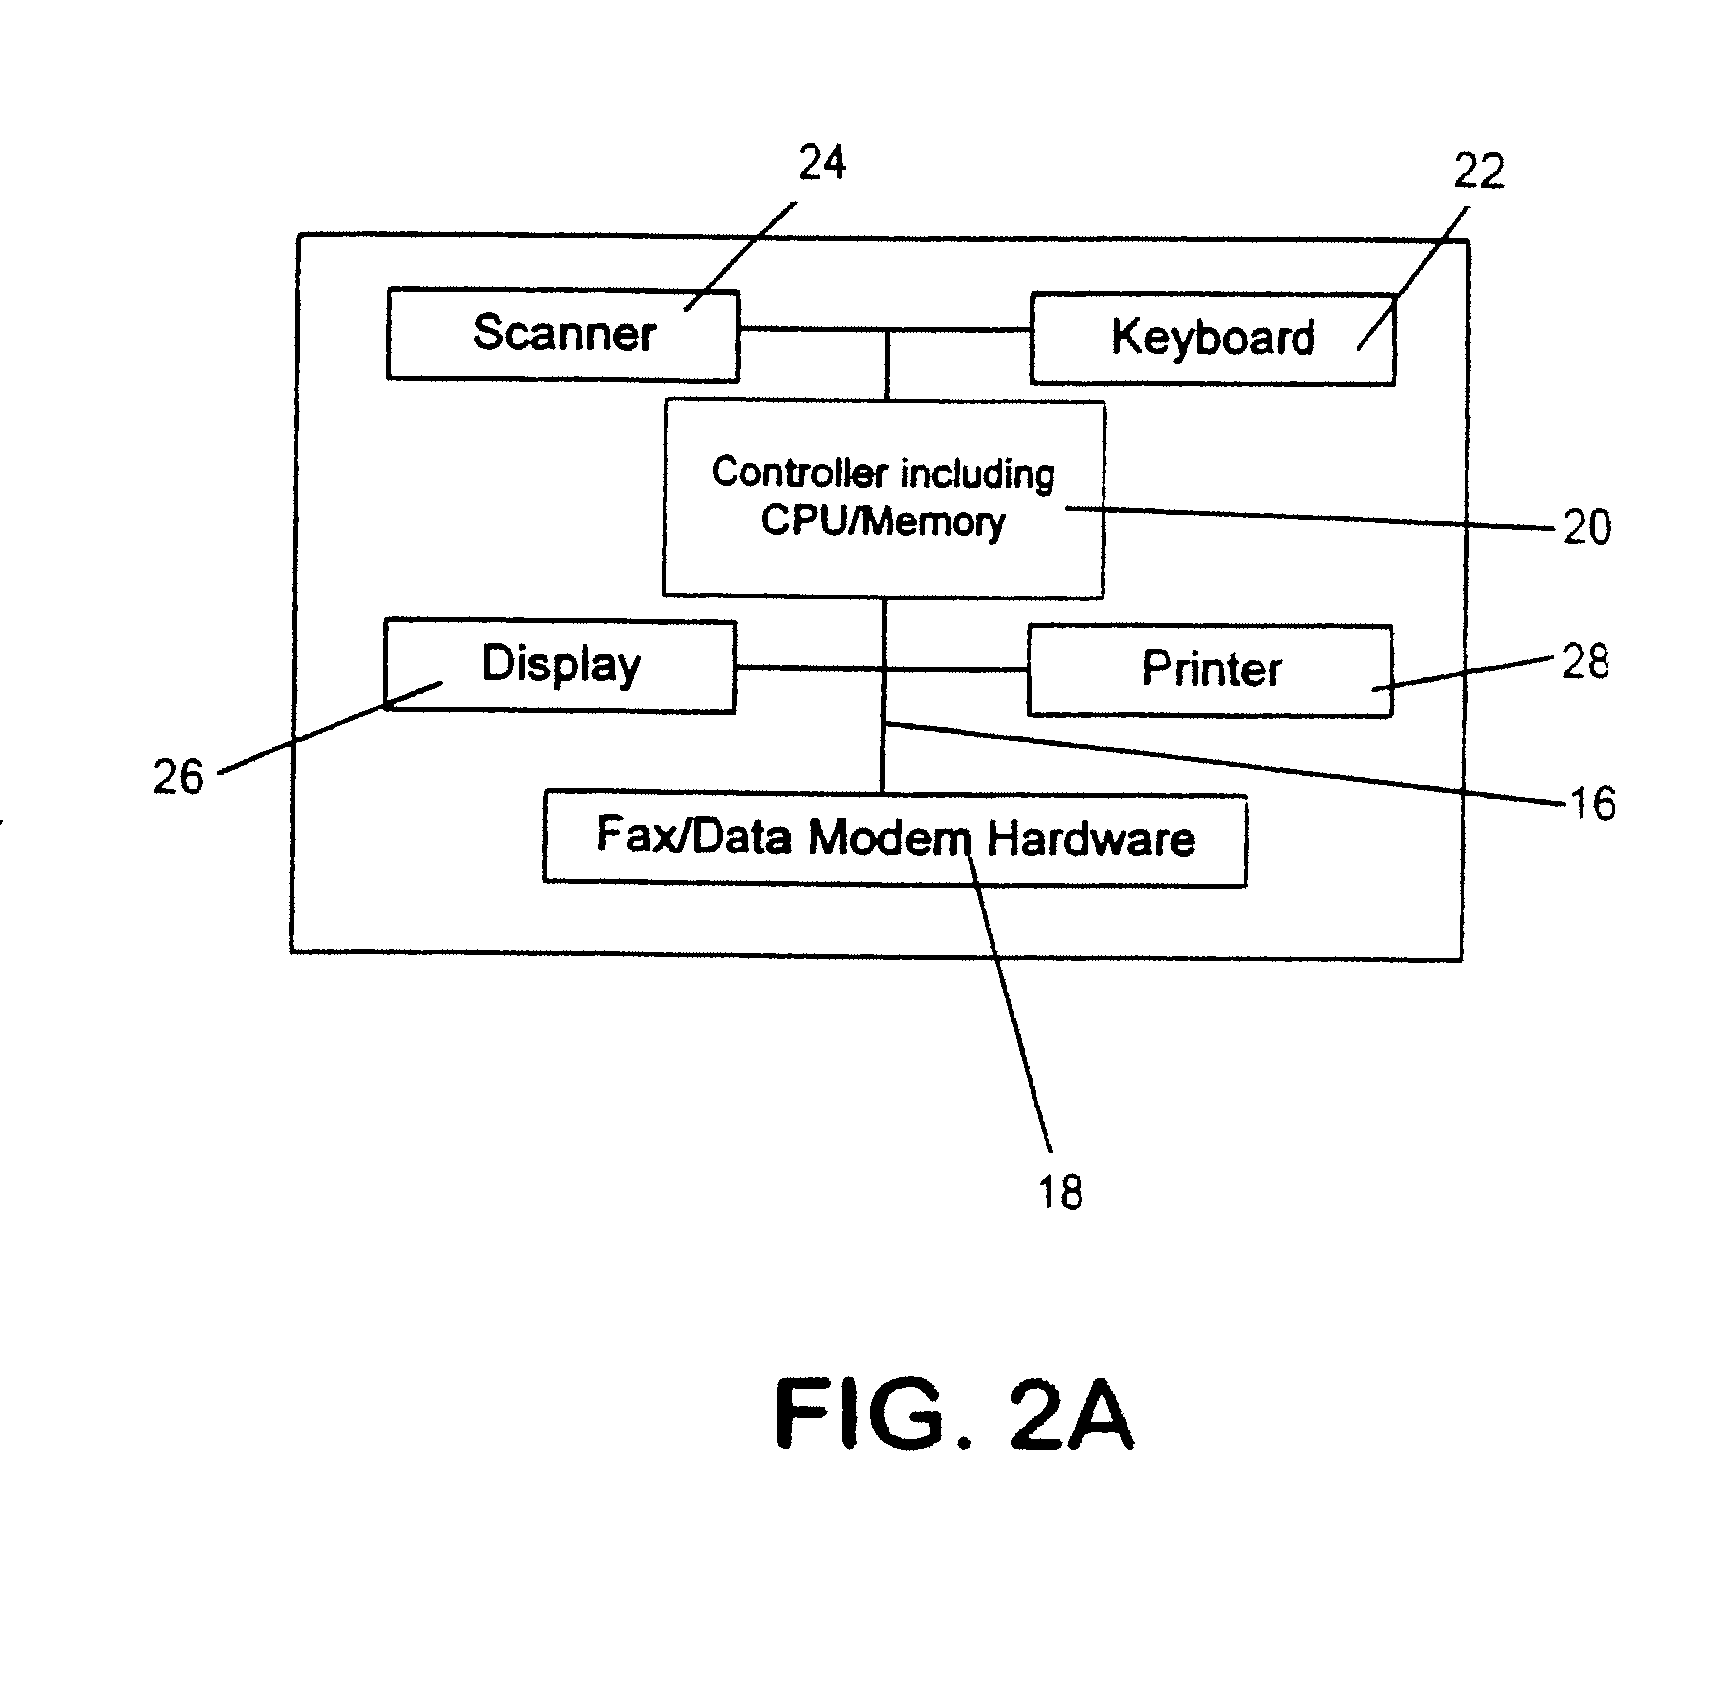 System and process for transmitting electronic mail using a conventional facsimile device